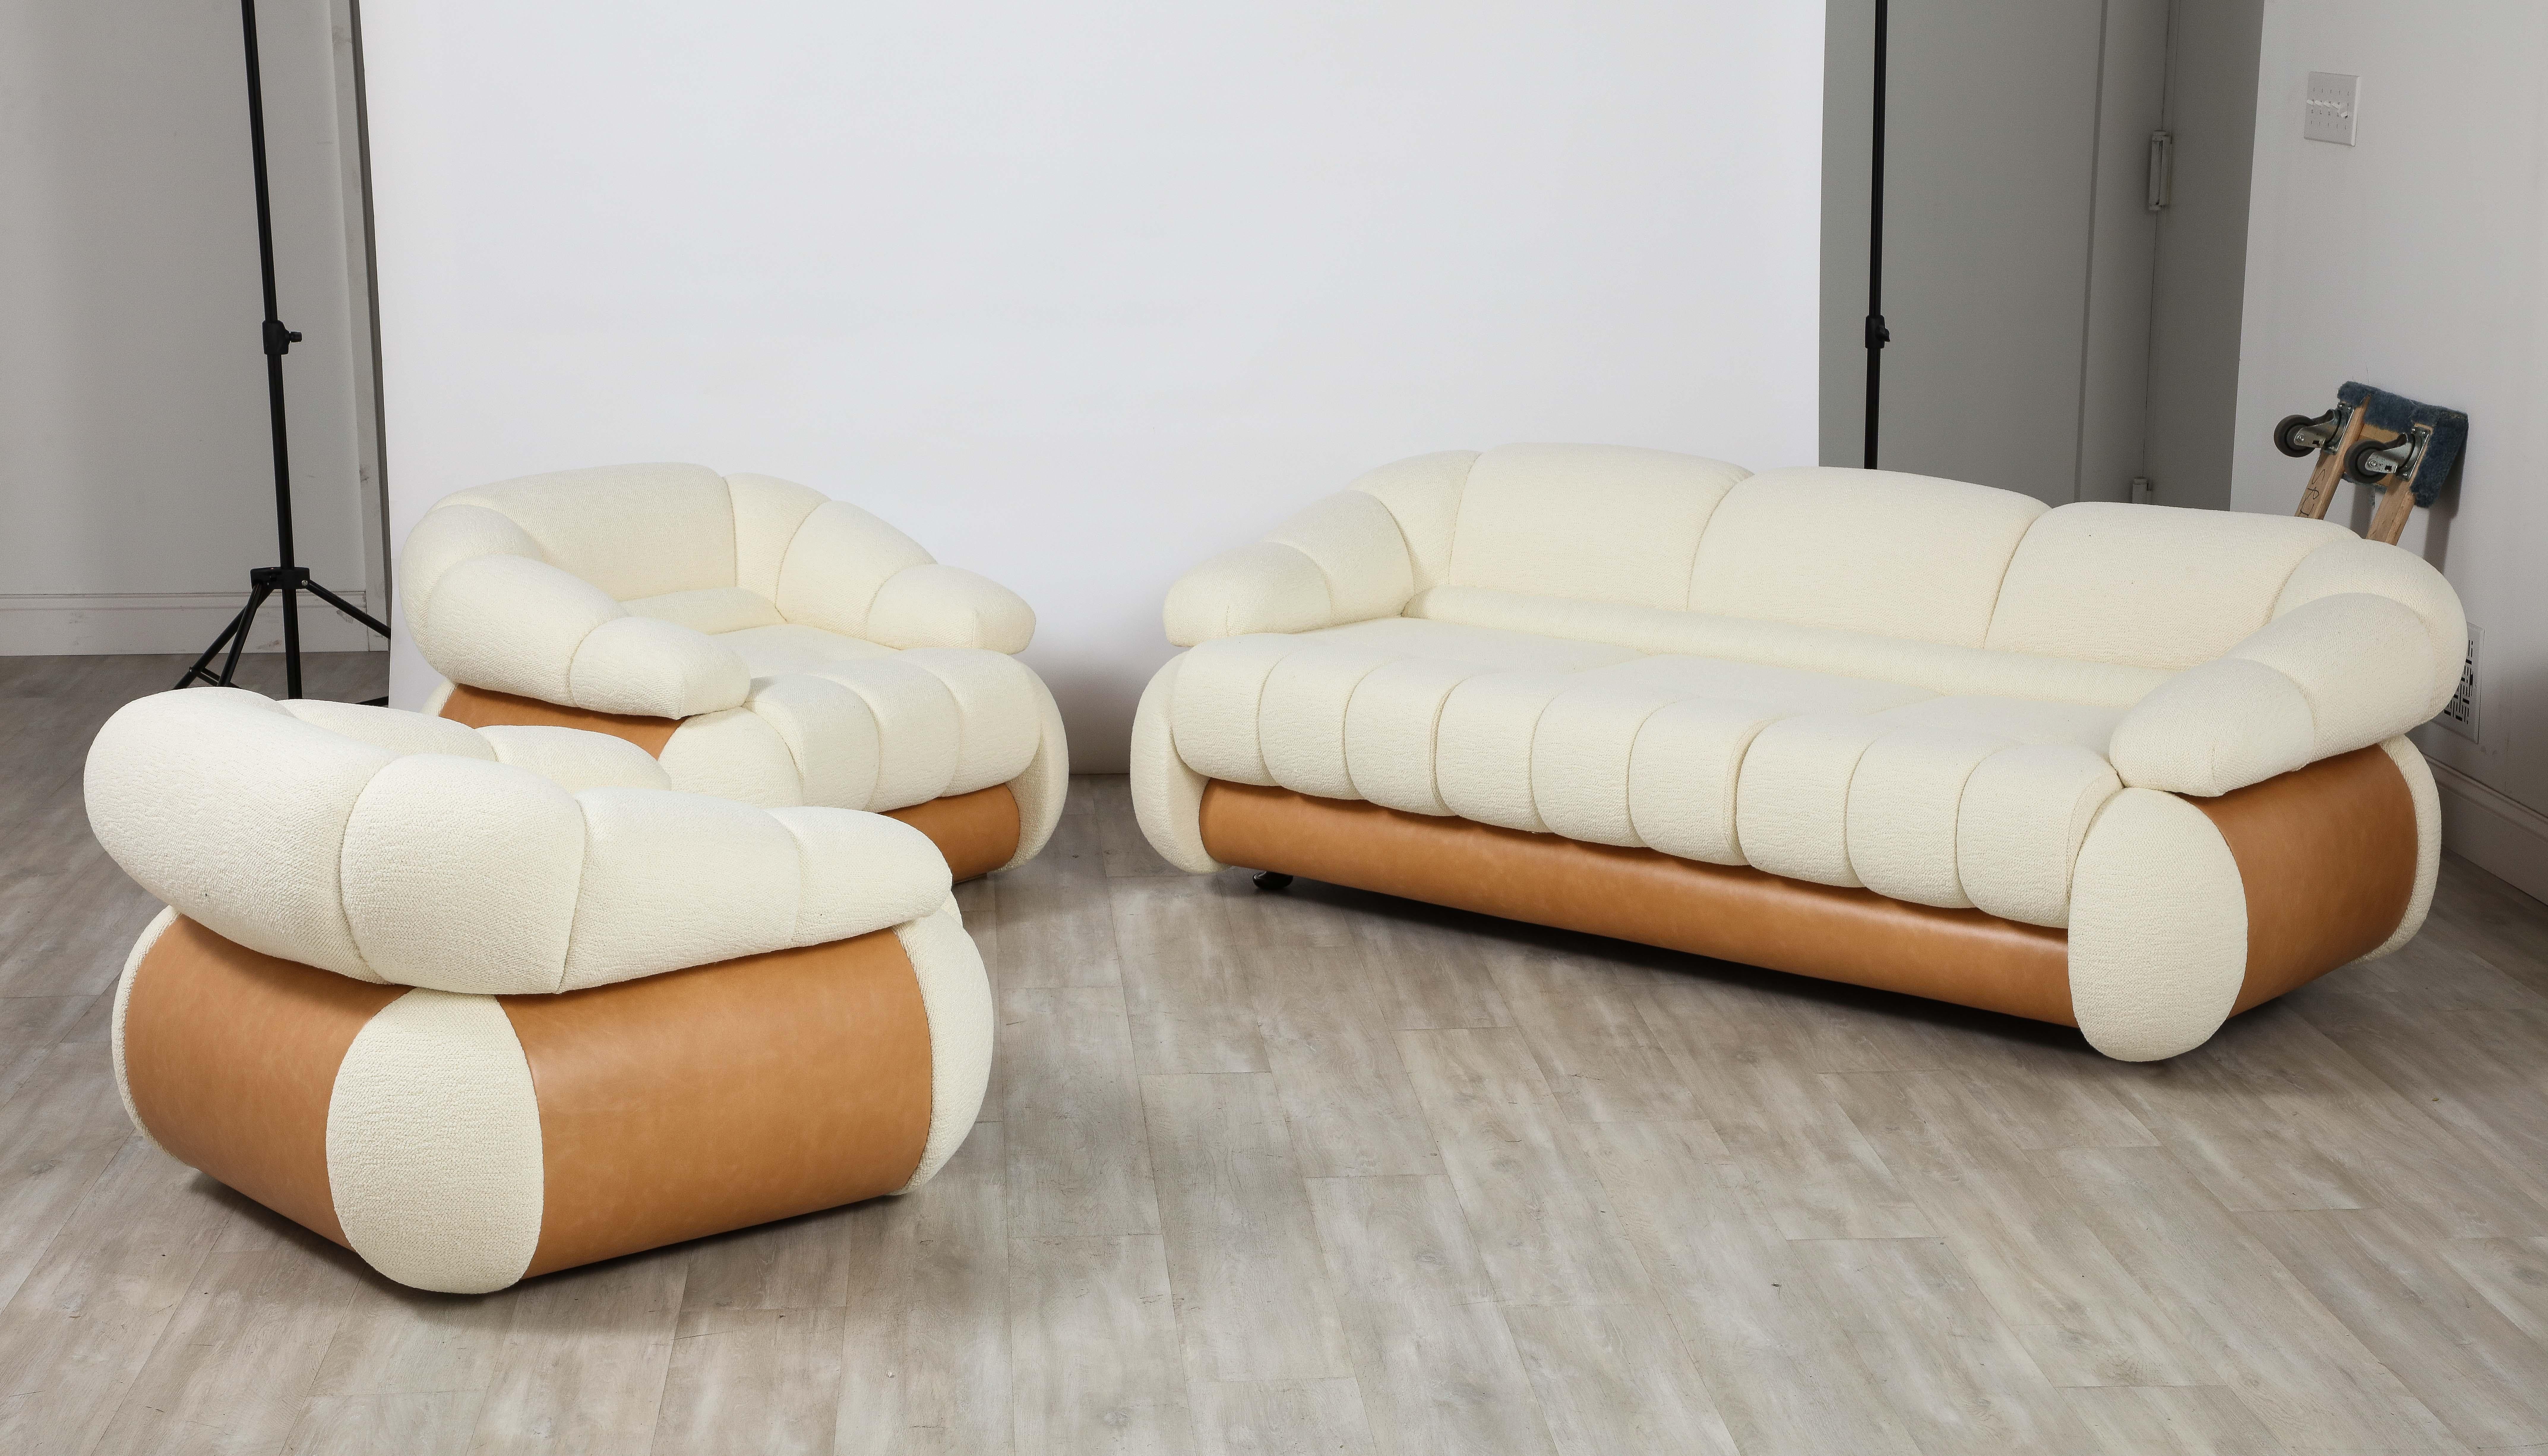 Adriano Piazzesi Italian 1970's Channel Tufted Sofa For Sale 7